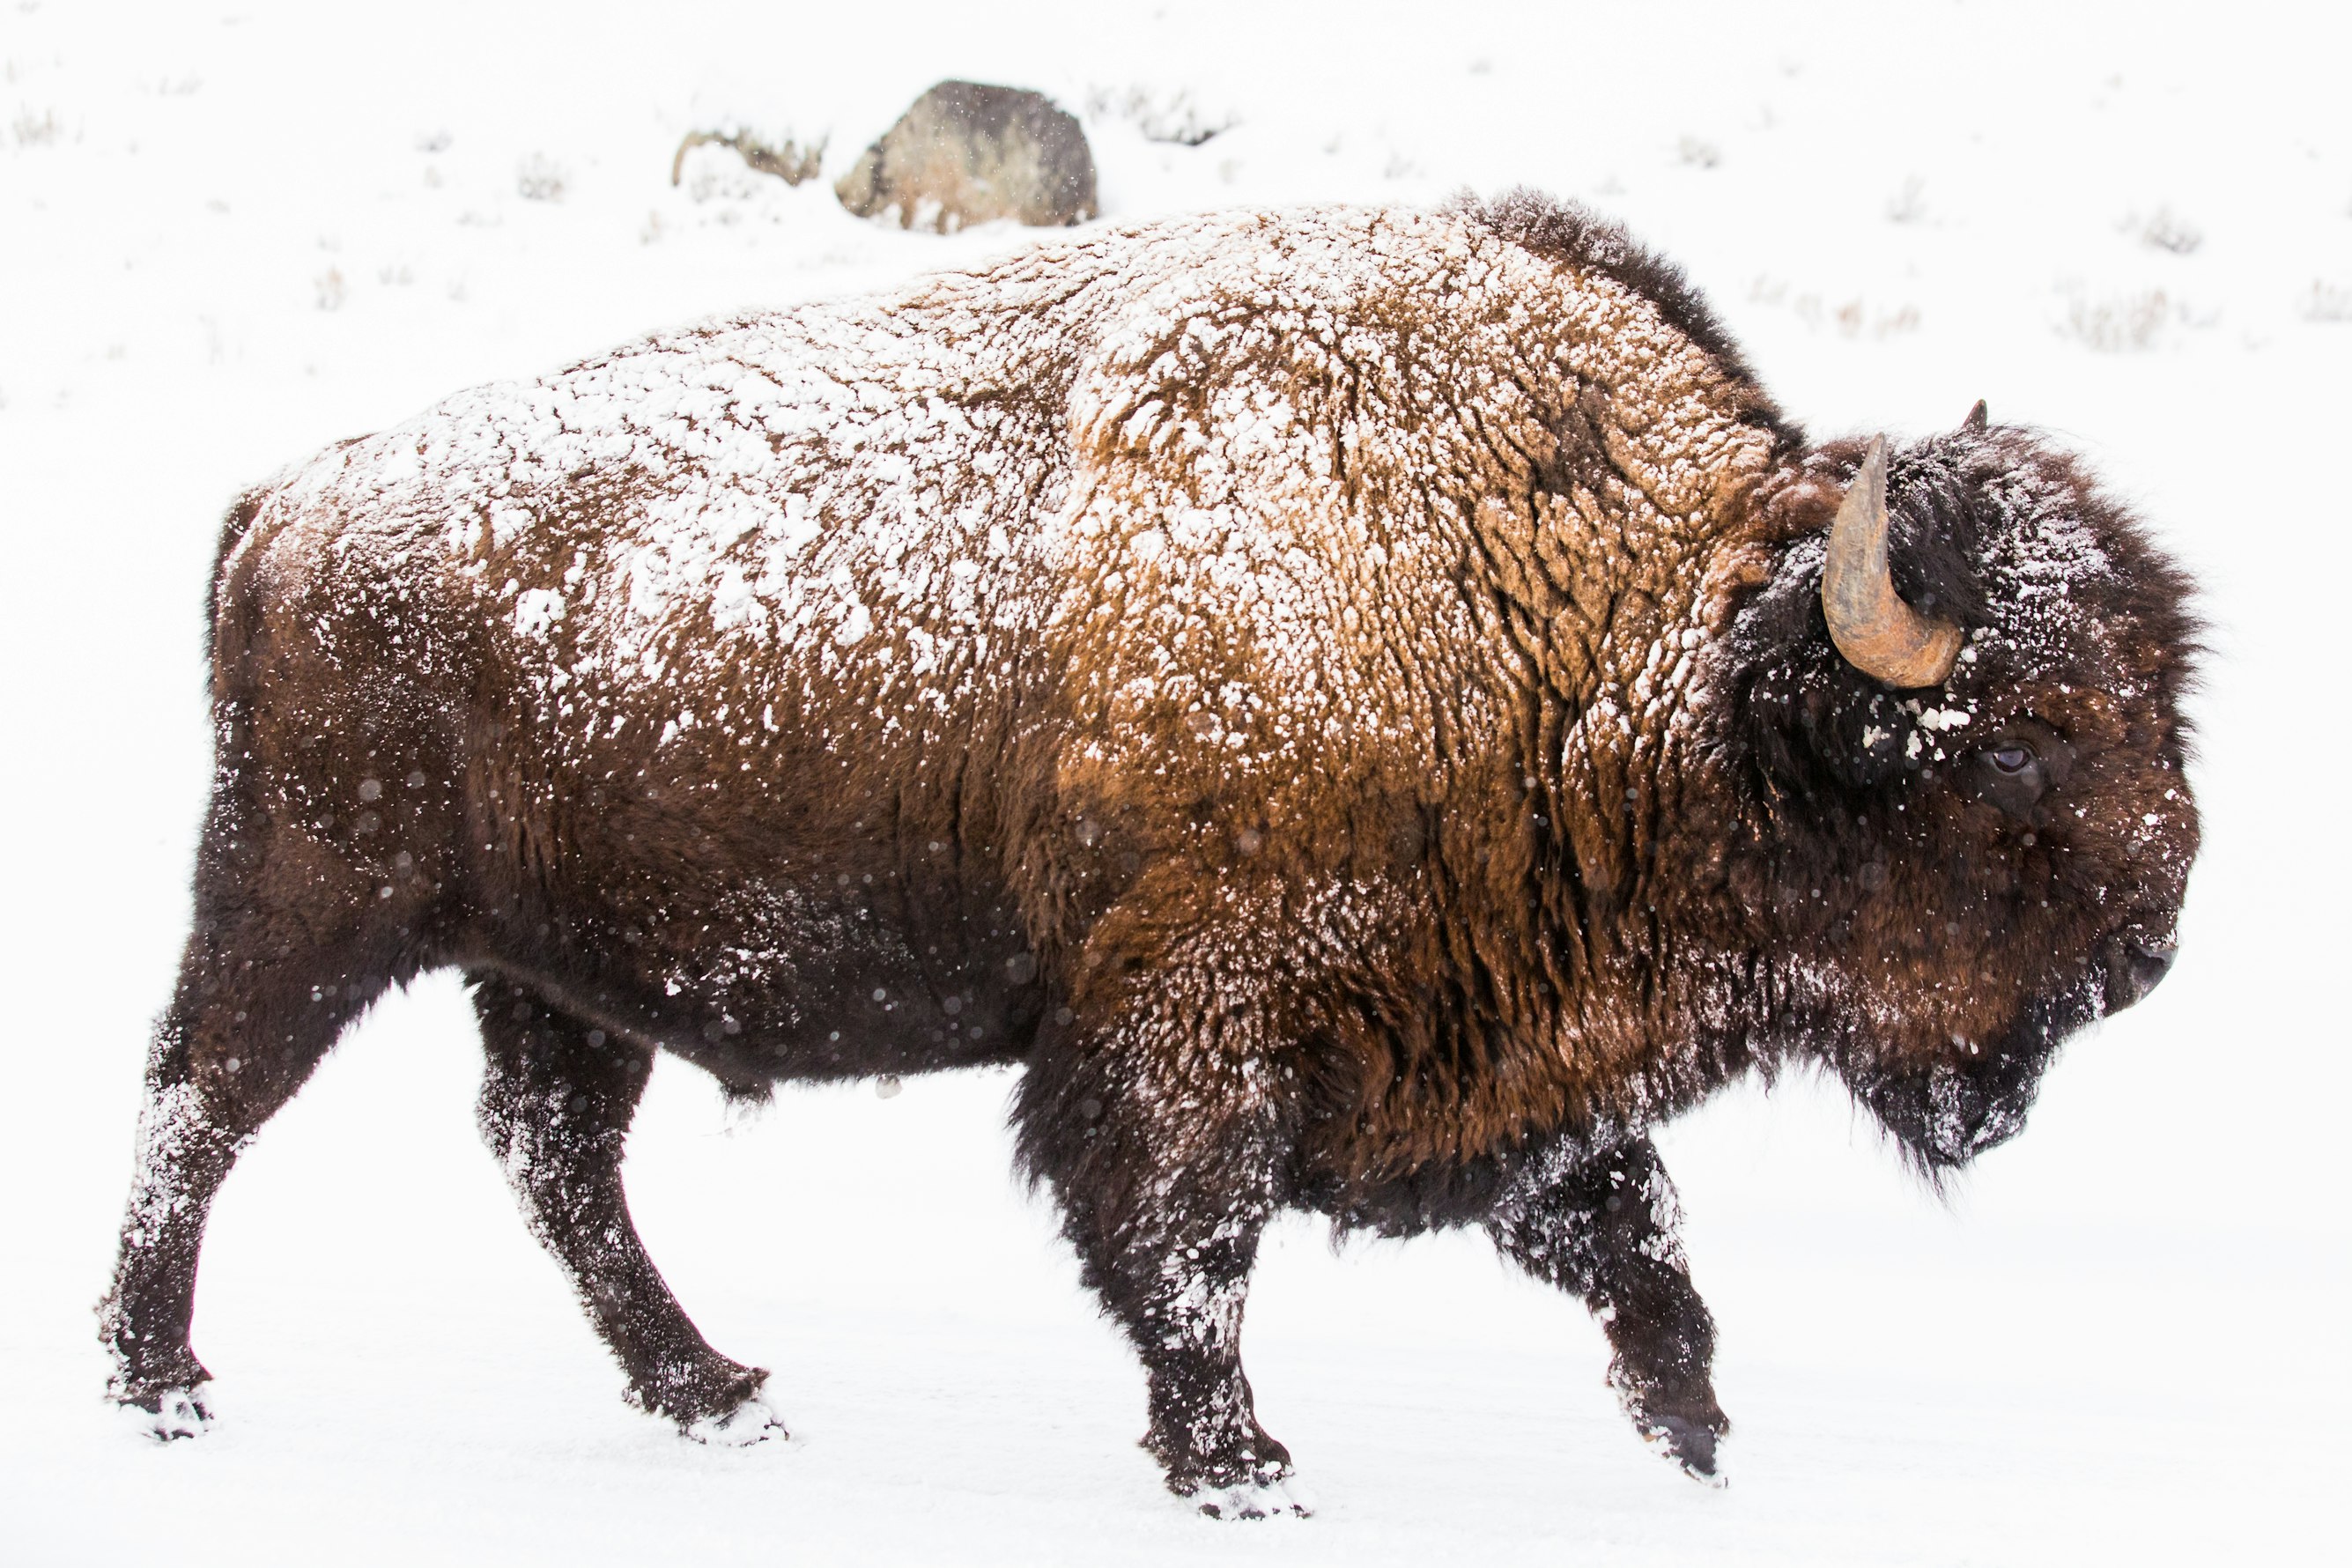 Yellowstone National Park’s Migrating Bison